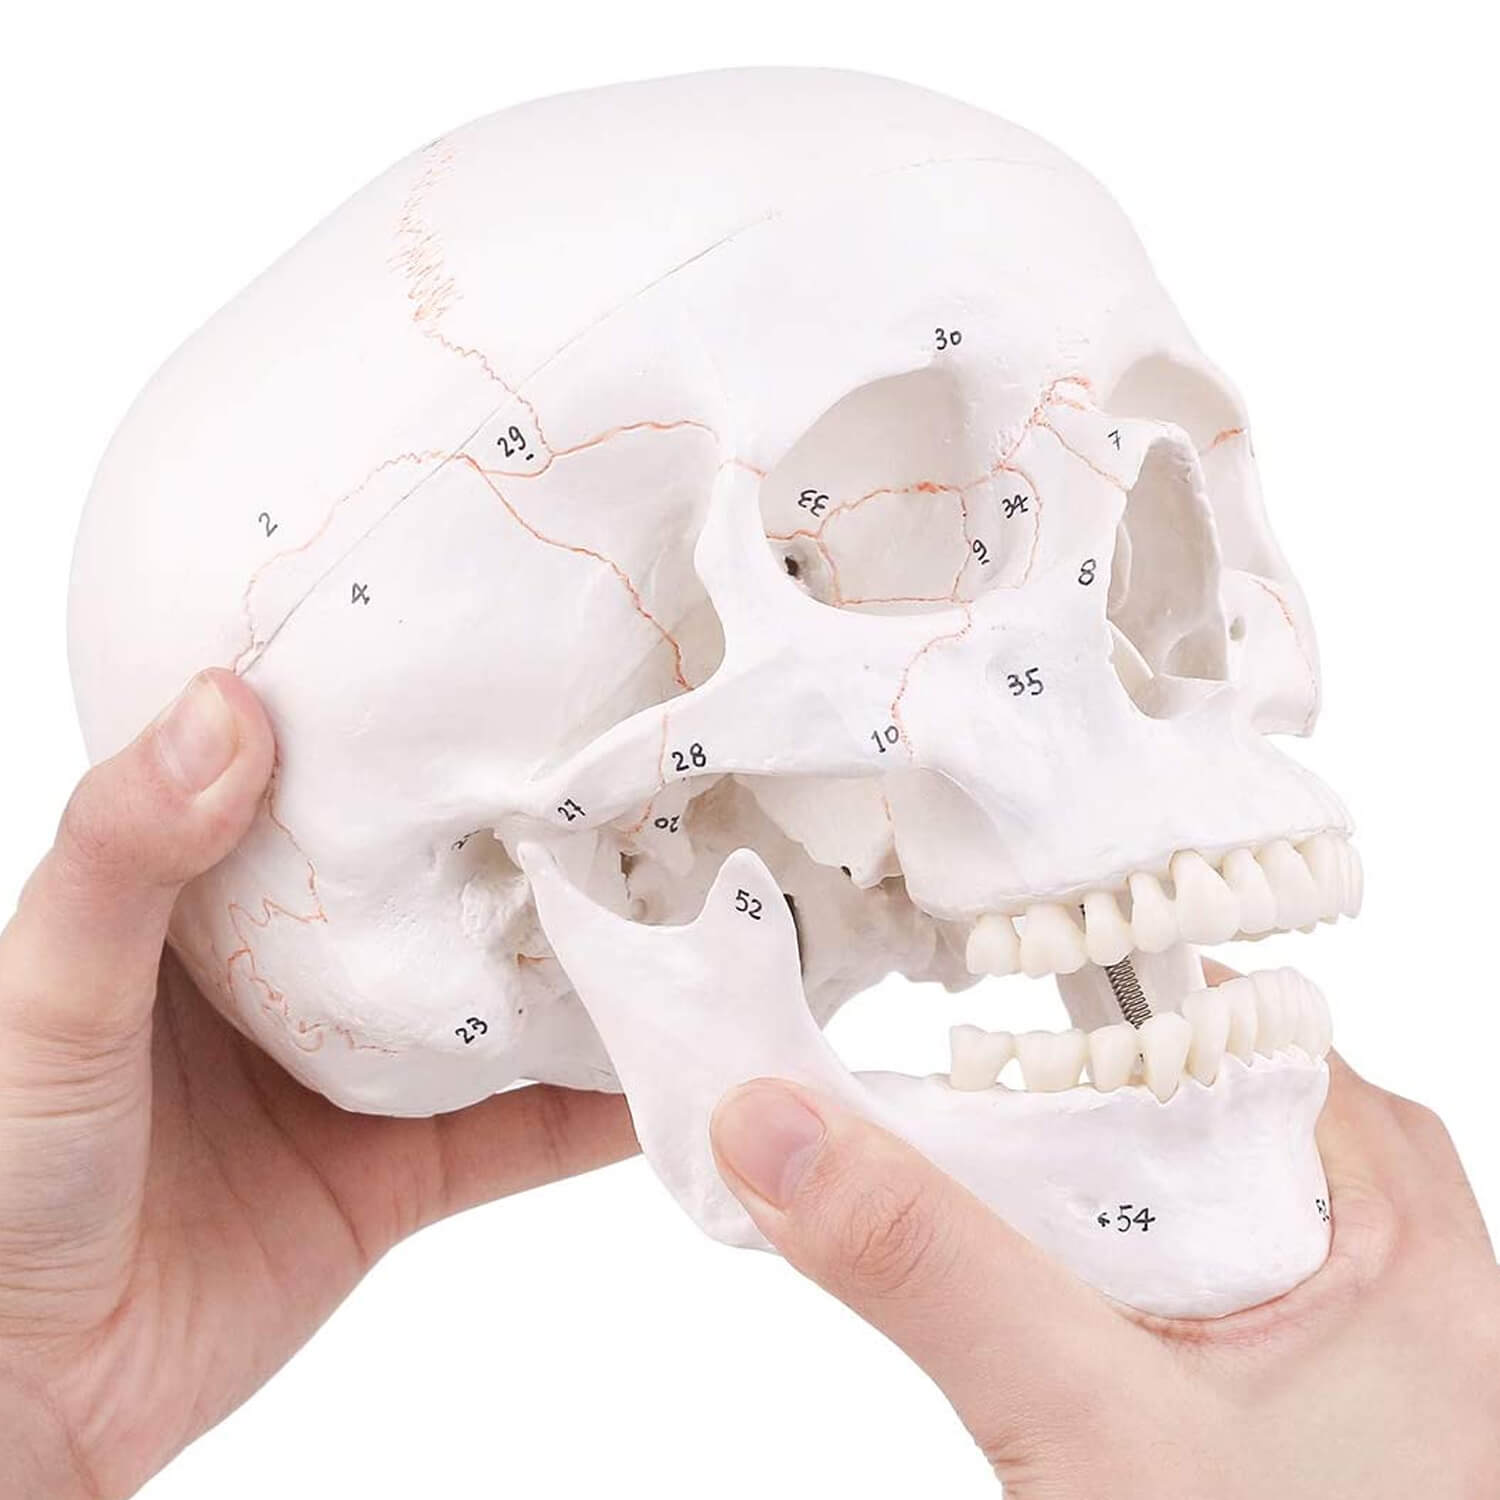 Life Size Human Skull Model Anatomy Skull with Newest Laser-Etched Fonts